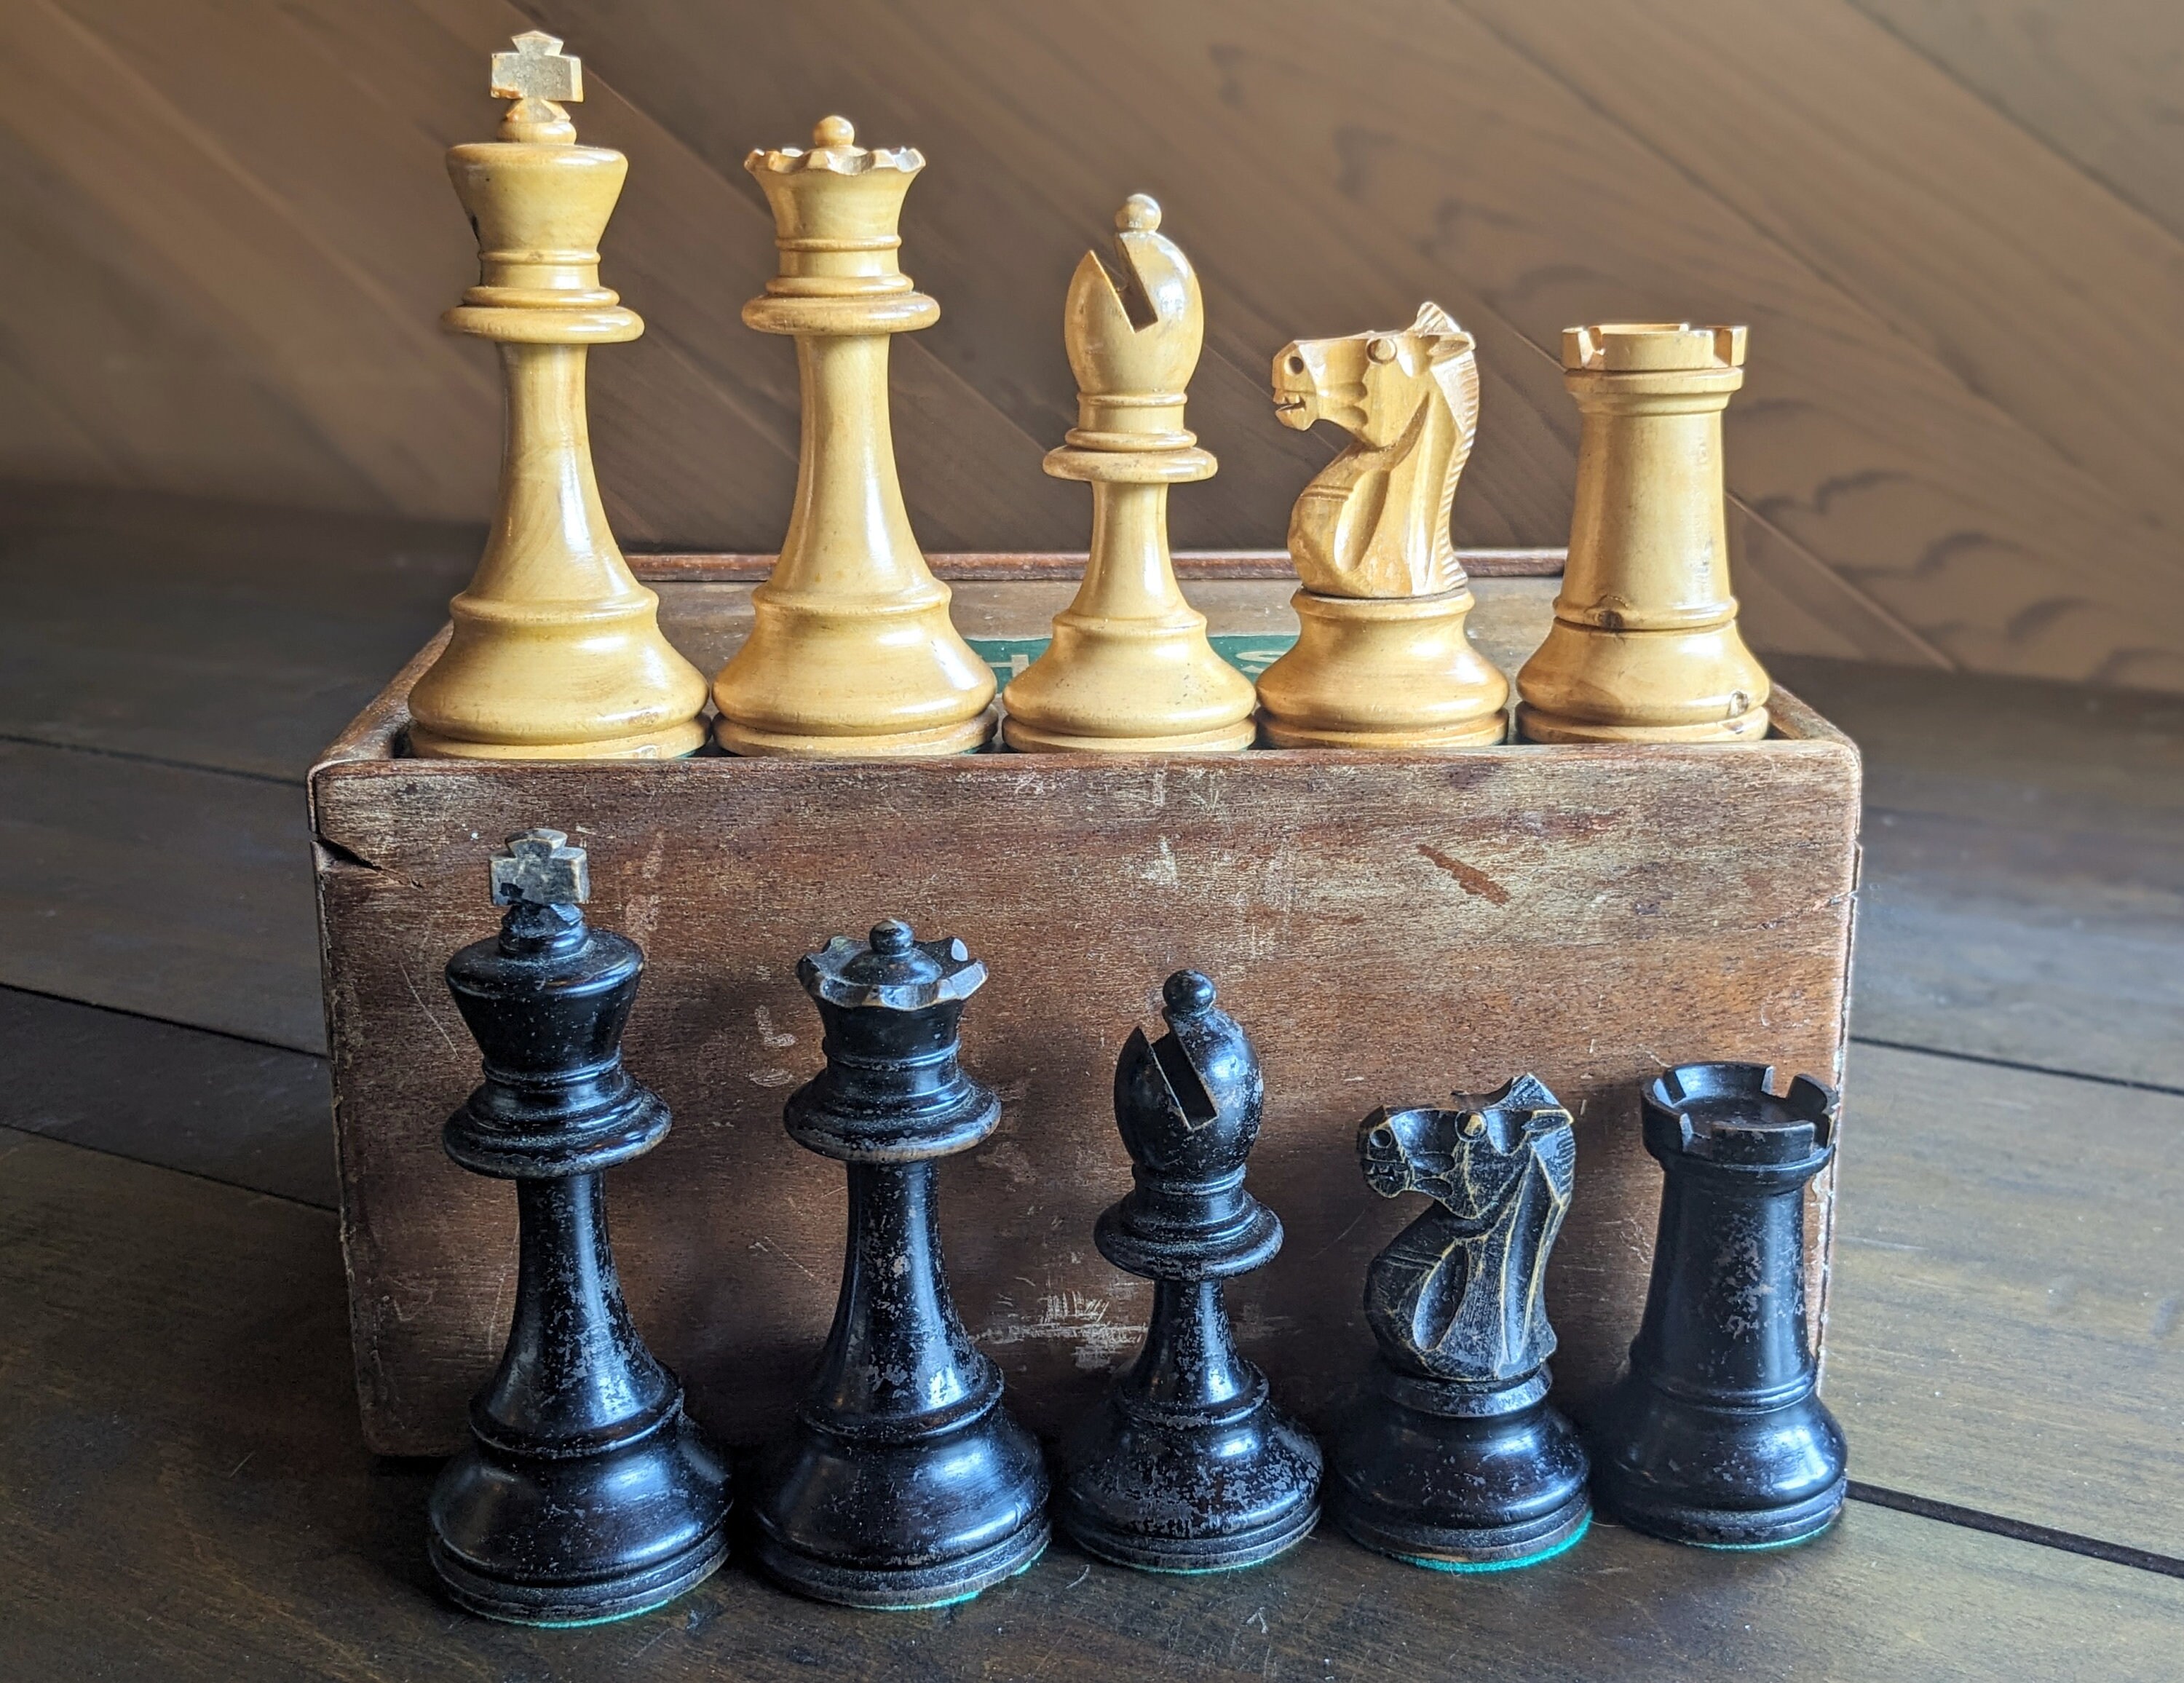 Early 20th Century Chess Board Made By Jacks Of London With Chess Set, 941200